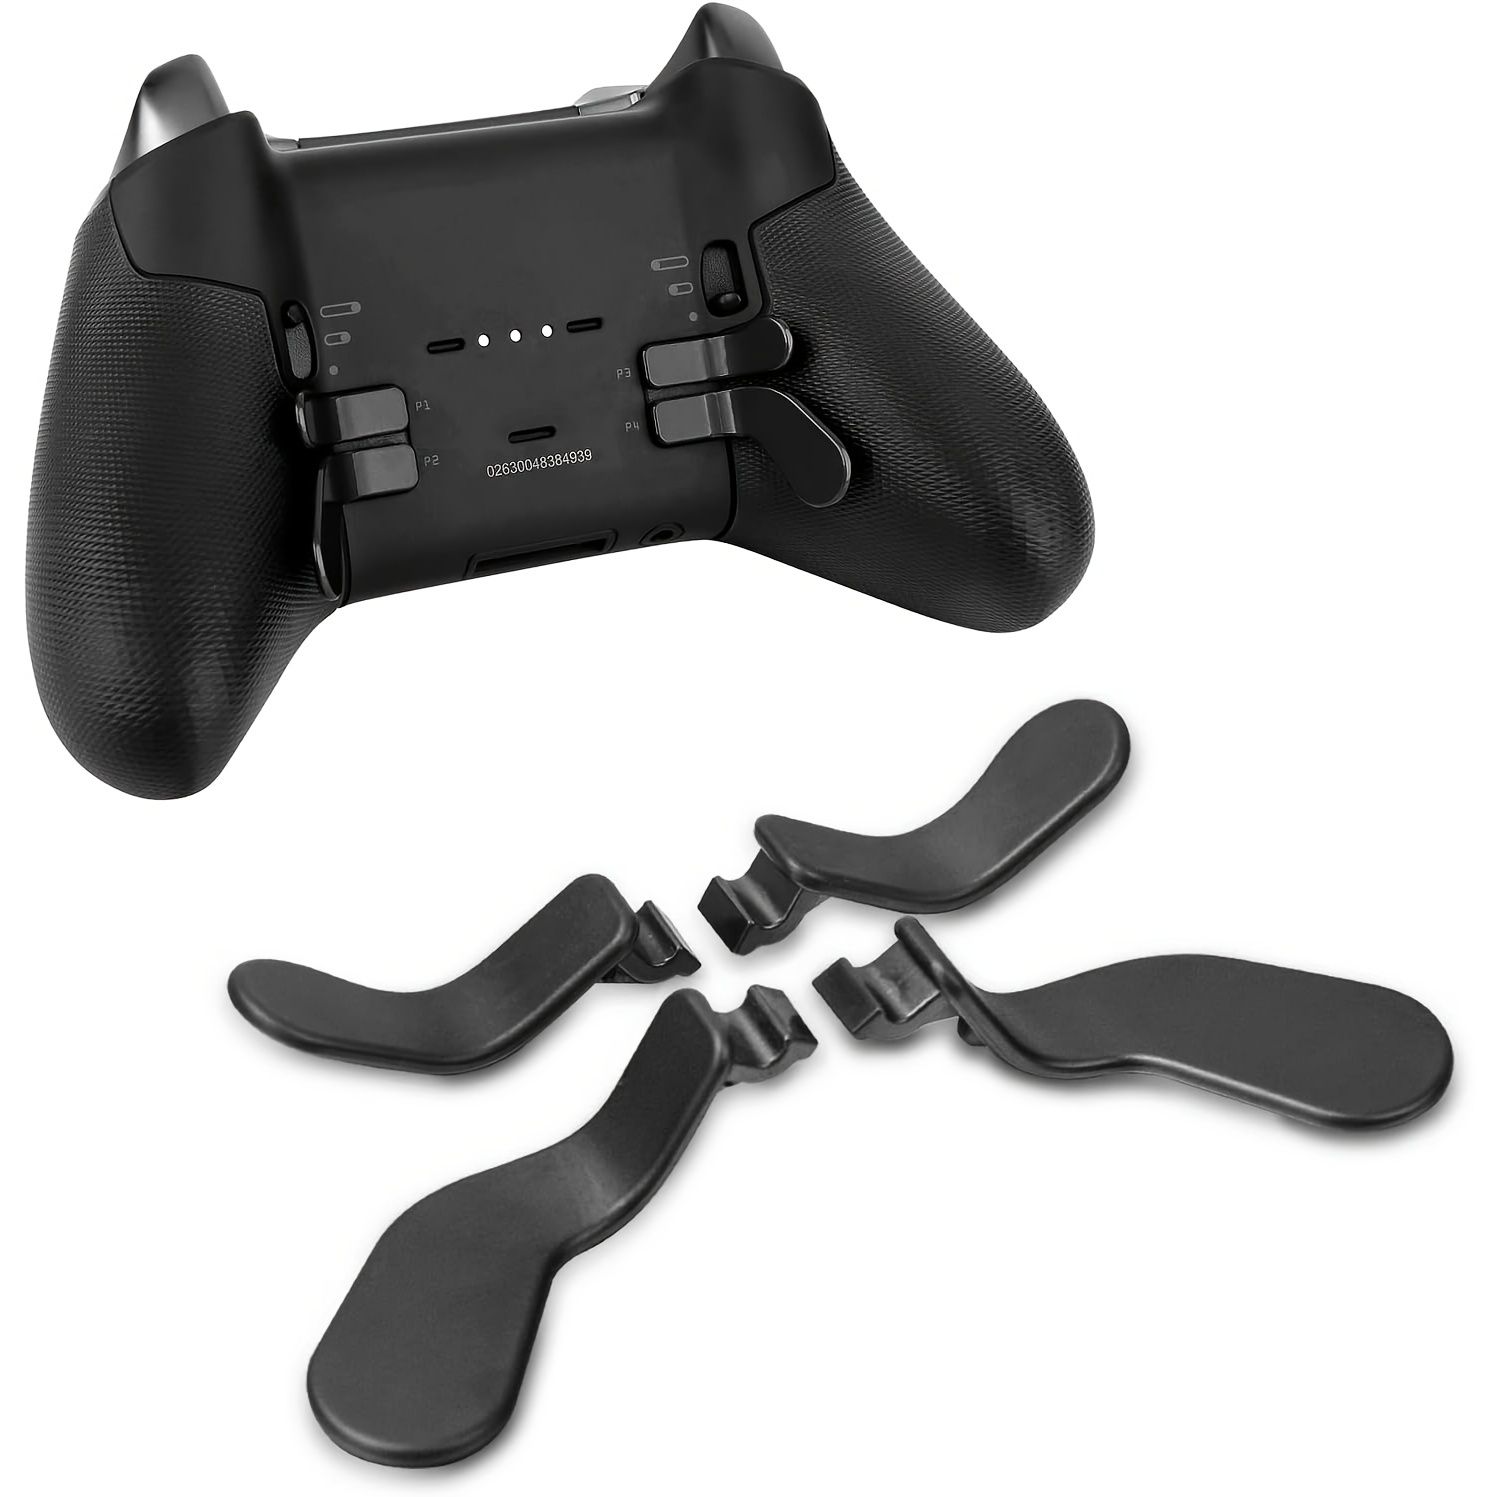 Elite Controller Paddles, Metal Stainless Steel Replacement Parts For * One  Elite Controller Series 2 Model 1797 - 4 PCS